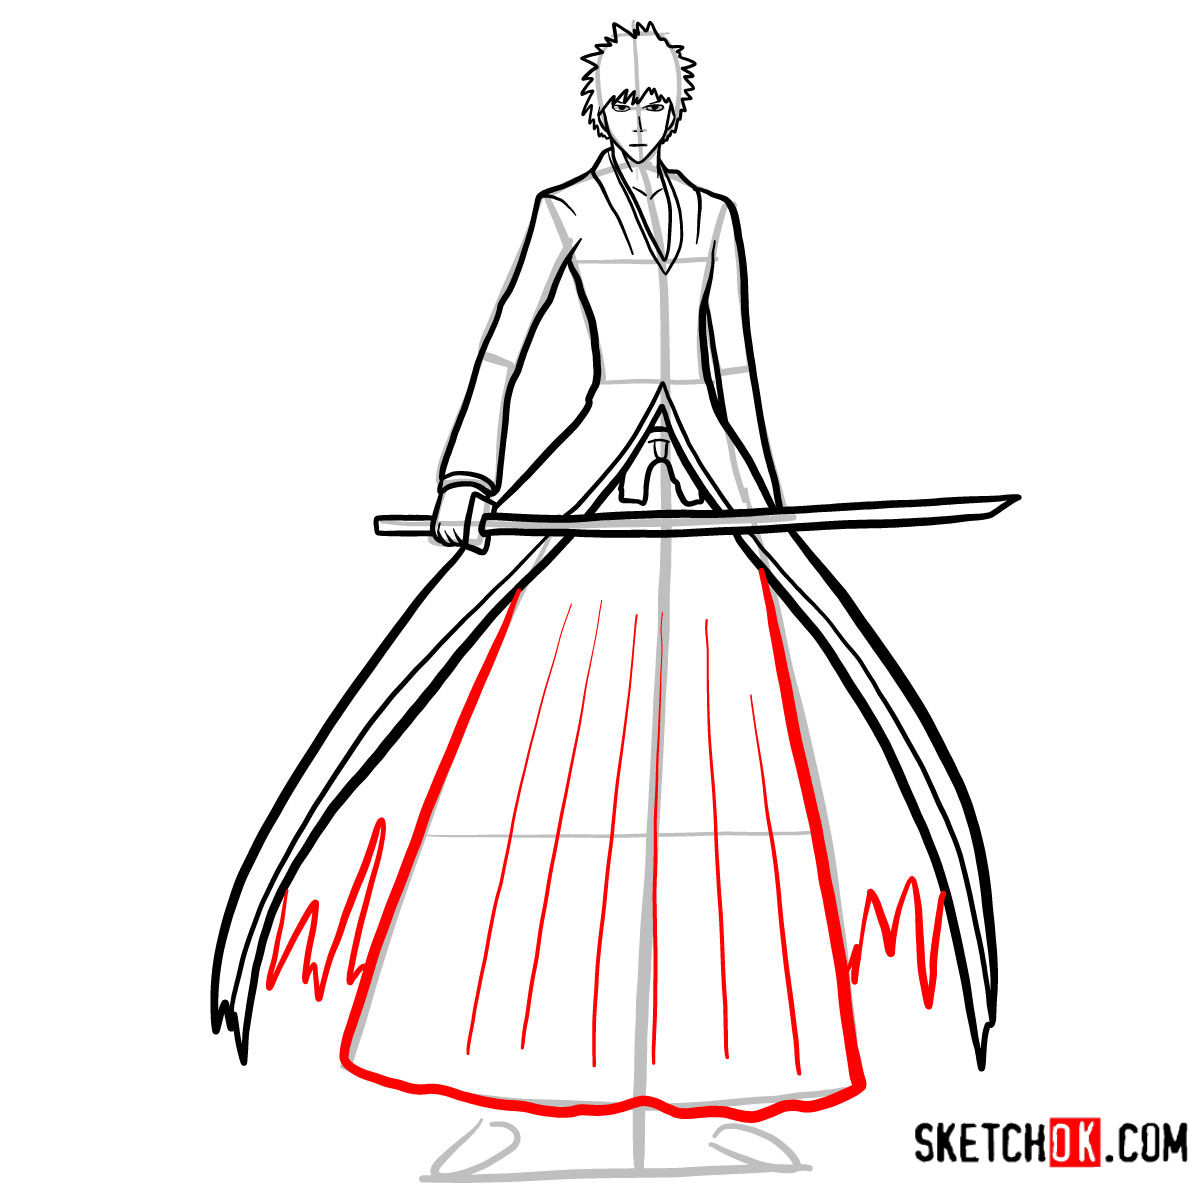 Finalizing the outfit in a step-by-step guide for Ichigo Kurosaki full body drawing - step 11